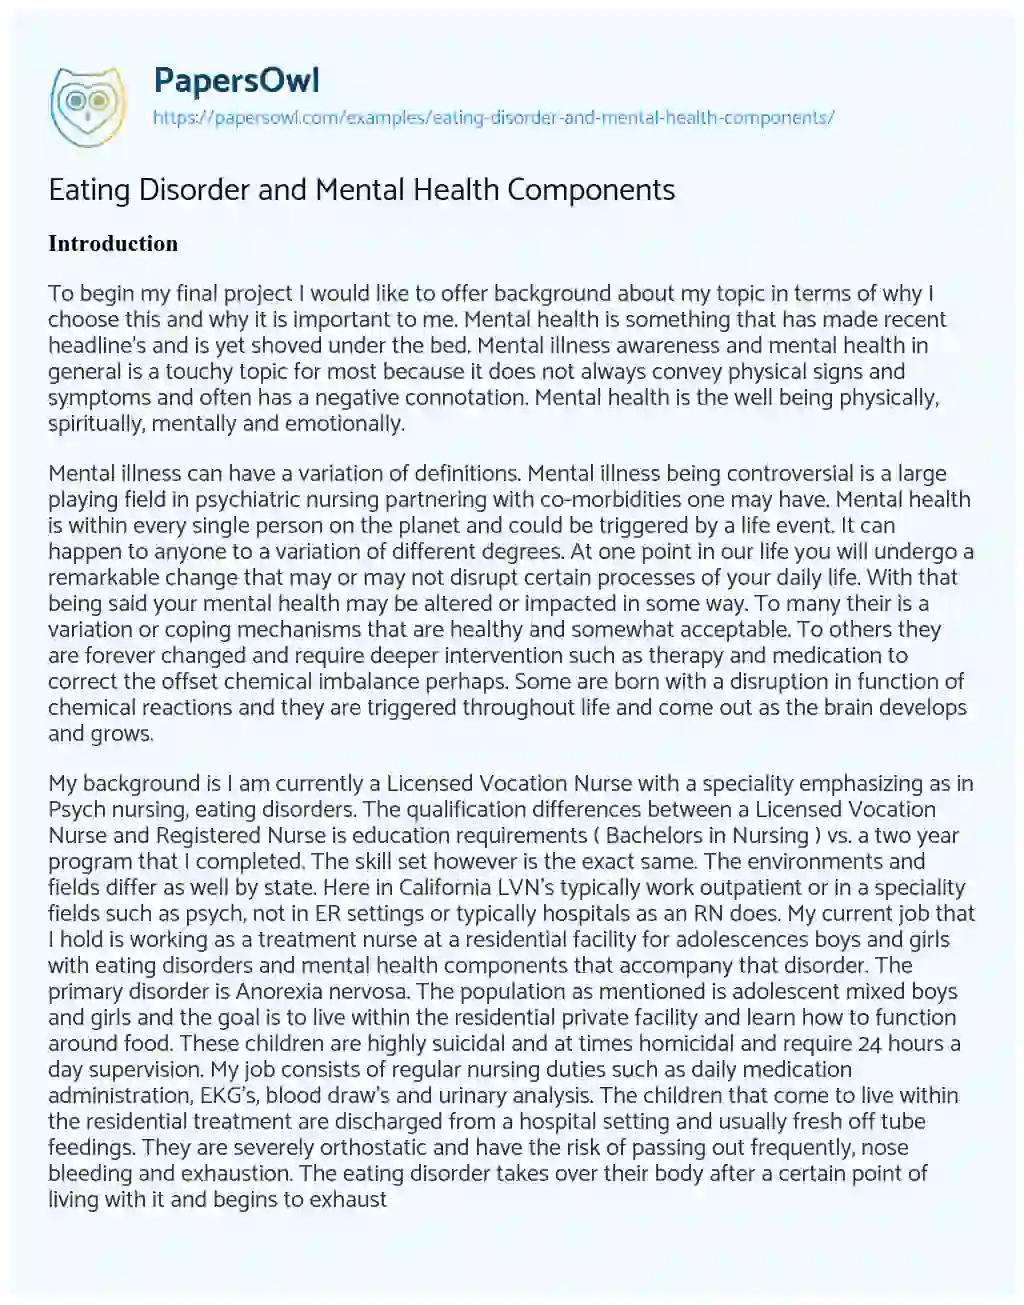 Essay on Eating Disorder and Mental Health Components